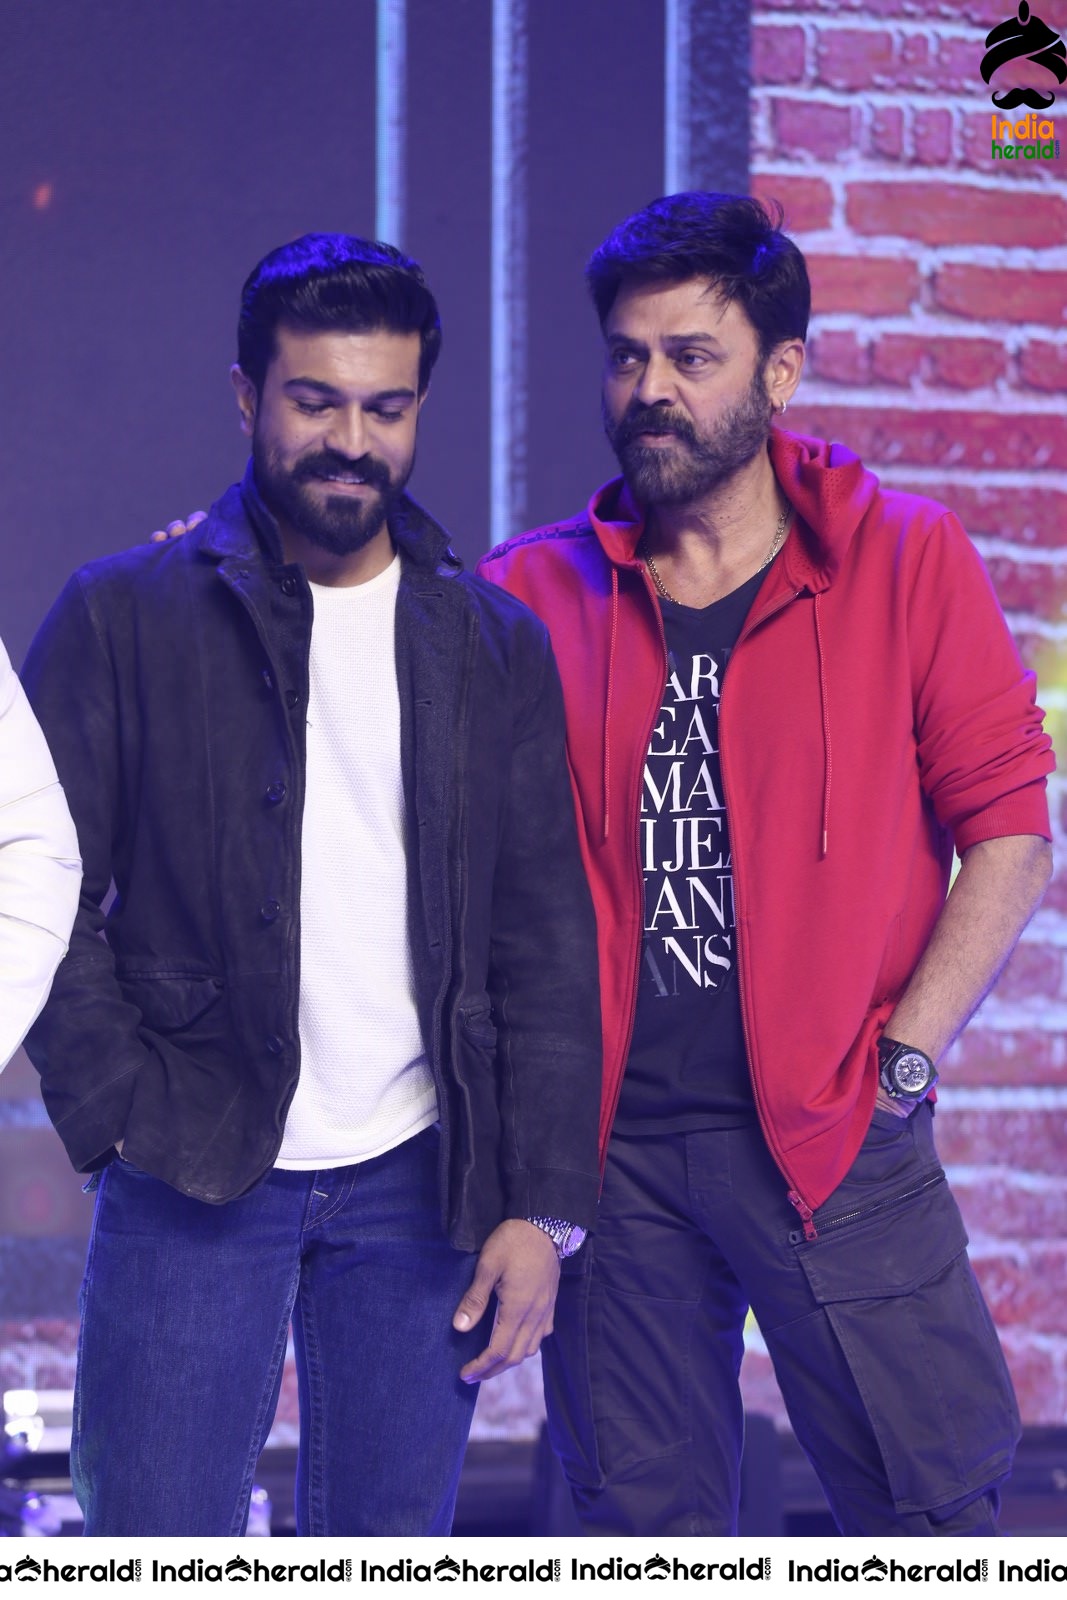 Actors Ram Charan and Venkatesh Seen Together On the Stage Set 1